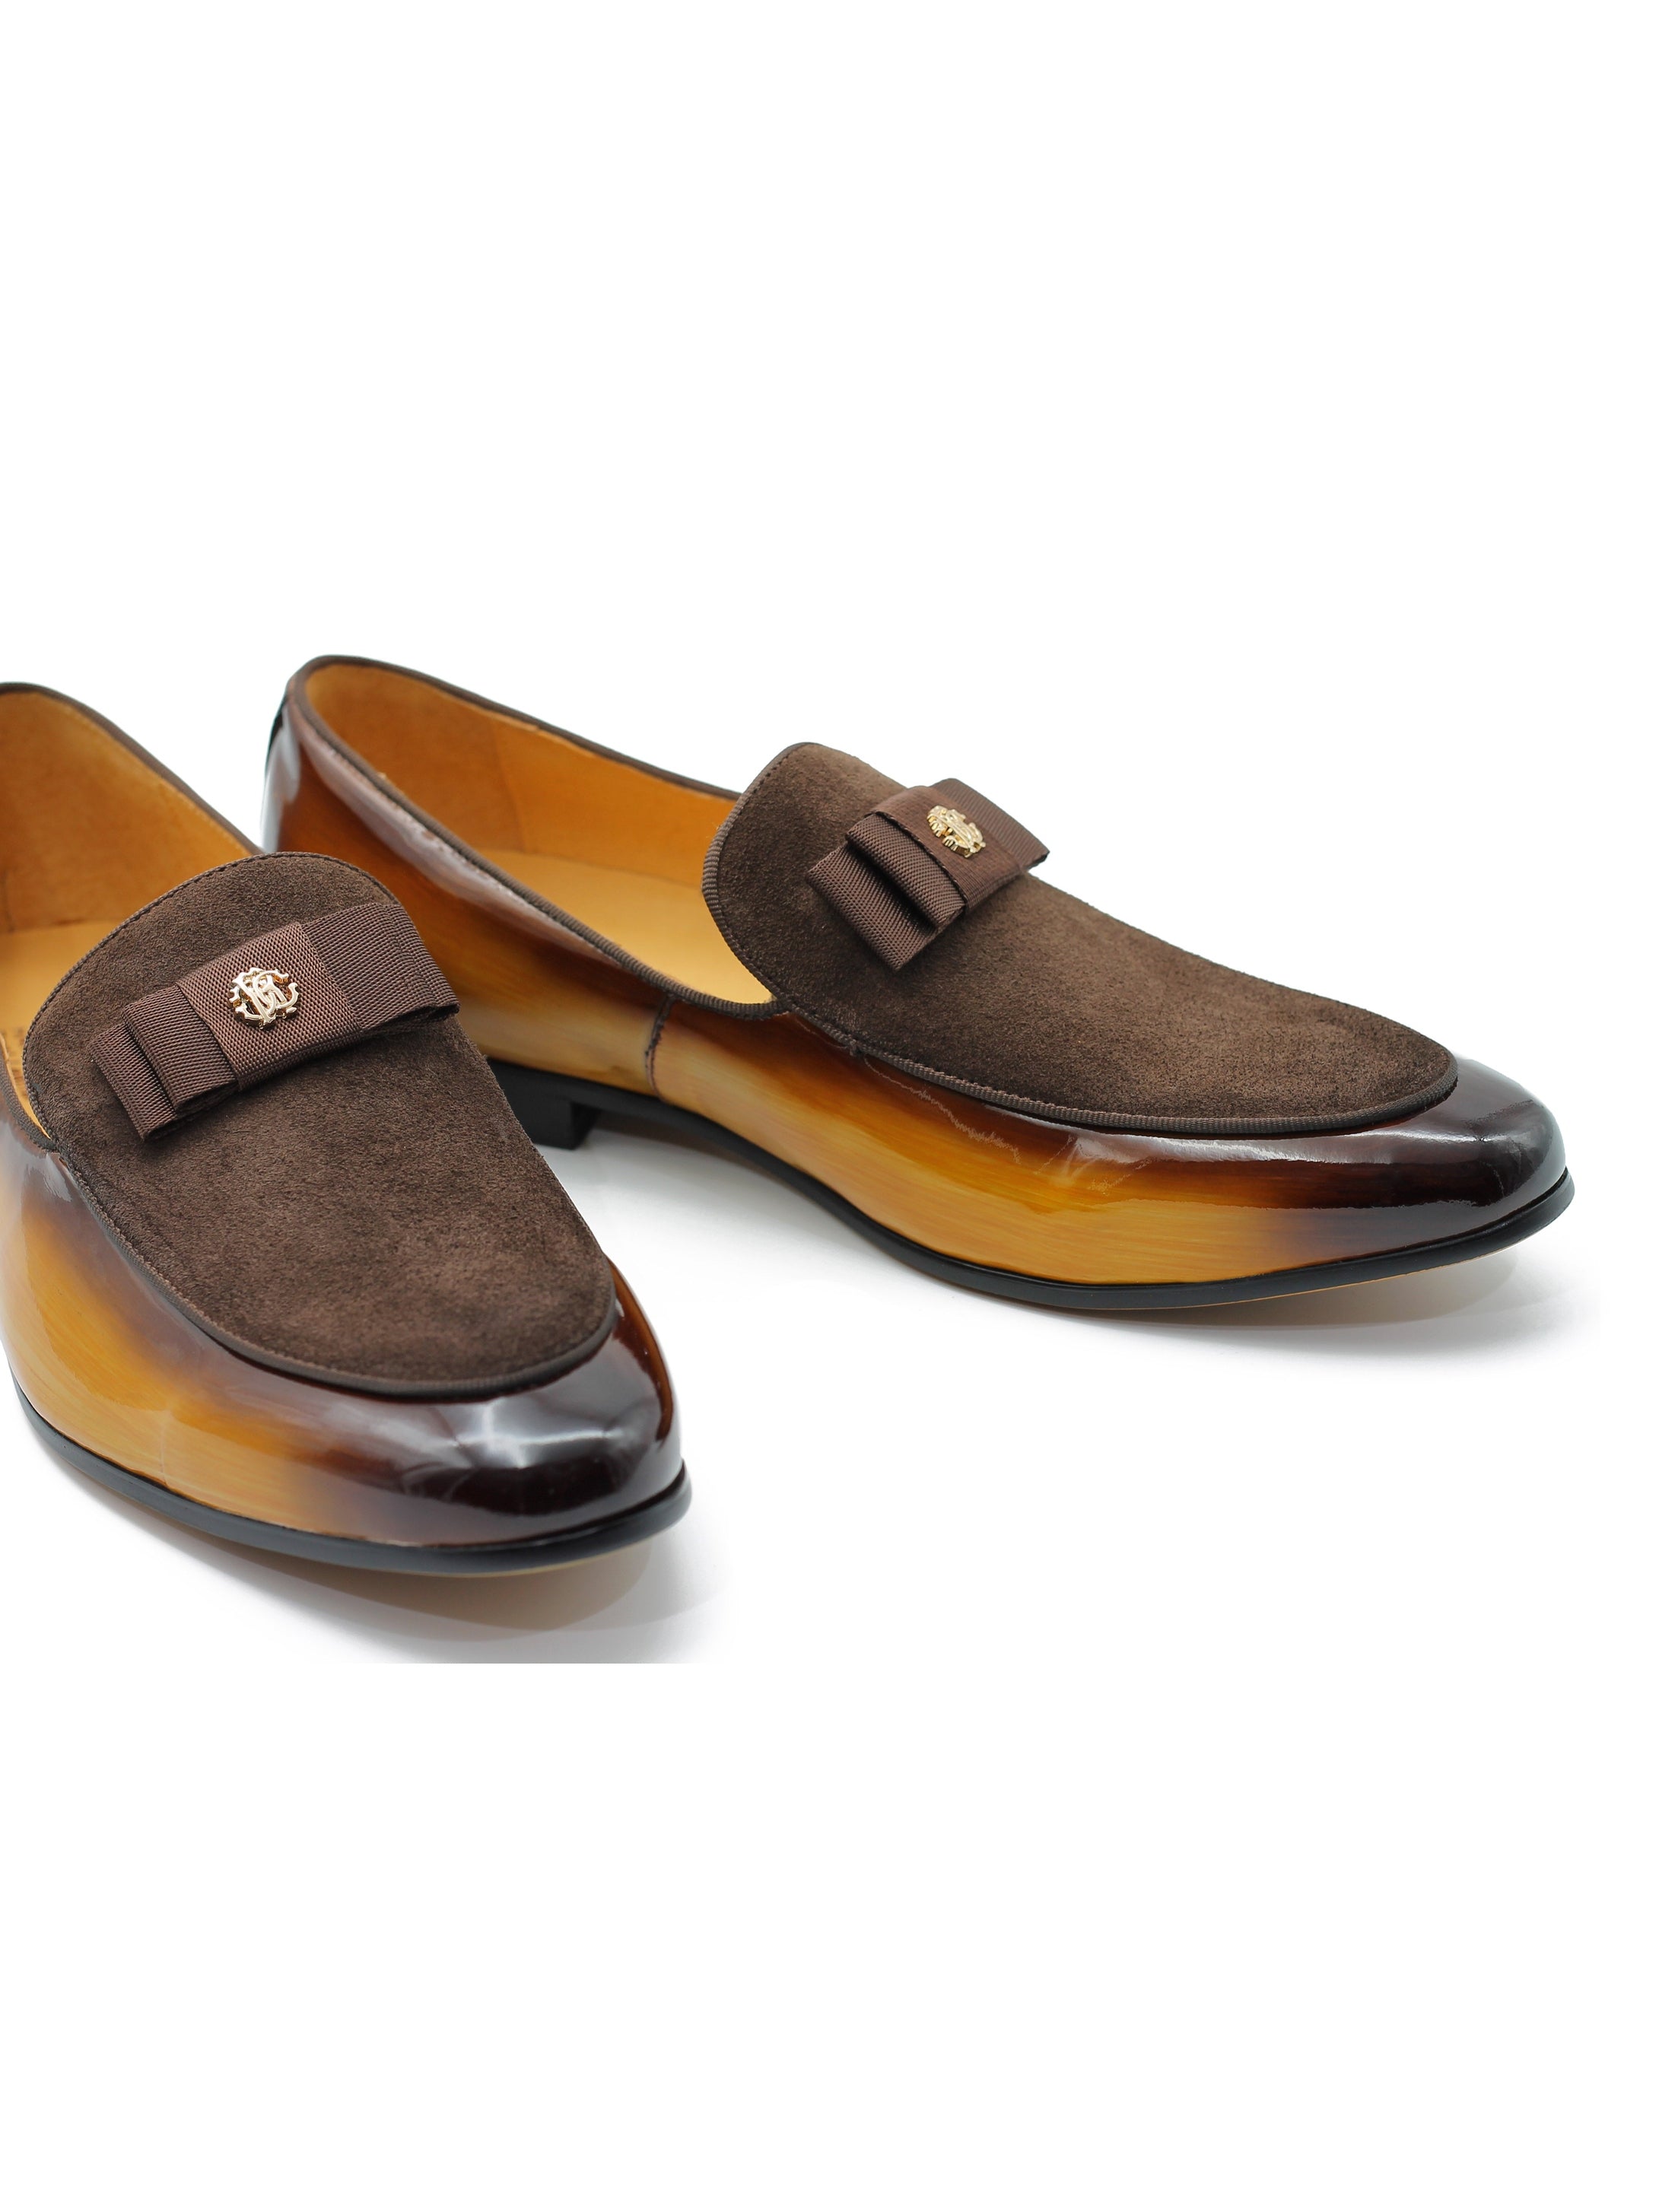 BROWN  LEATHER SUEDE BELGIAN BOWTIE LOAFERS